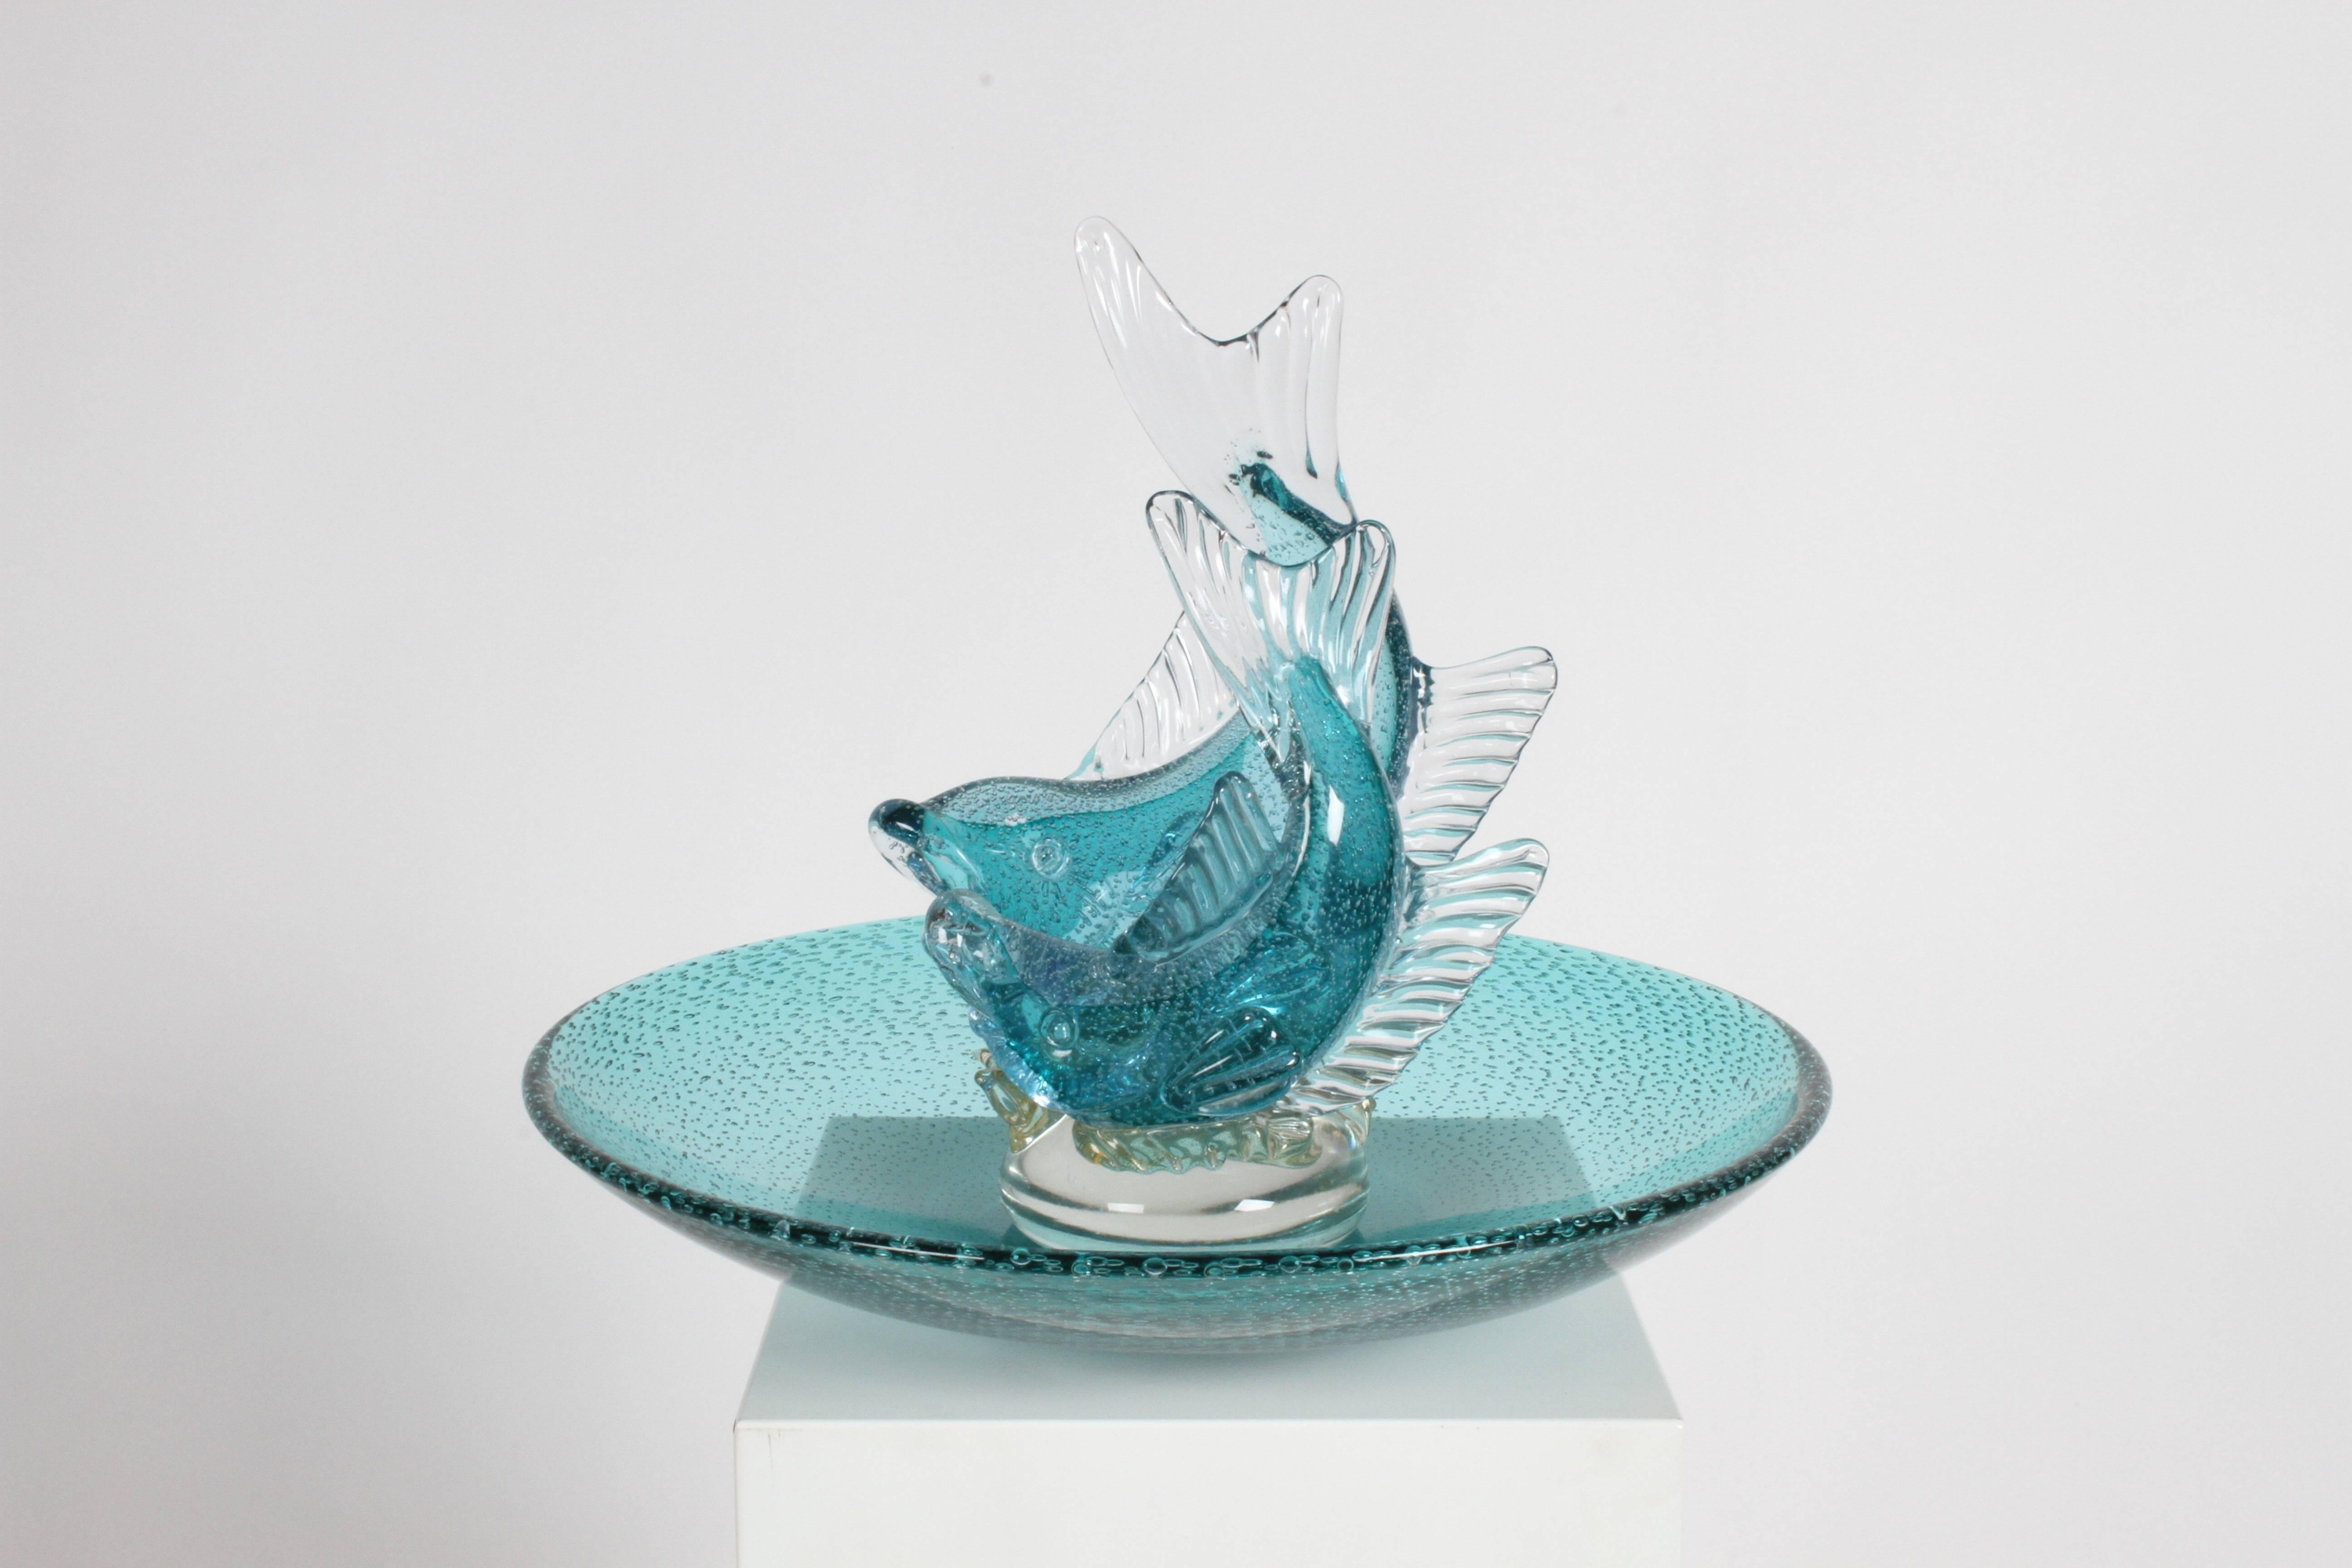 Large Sommerso Alfredo Barbini for Cenedese Murano Italian glass double fish centerpiece platter. Bullicante glass formed fish and centrepiece bowl. No signs of chips or breaks. 

Measure: Platter is 18